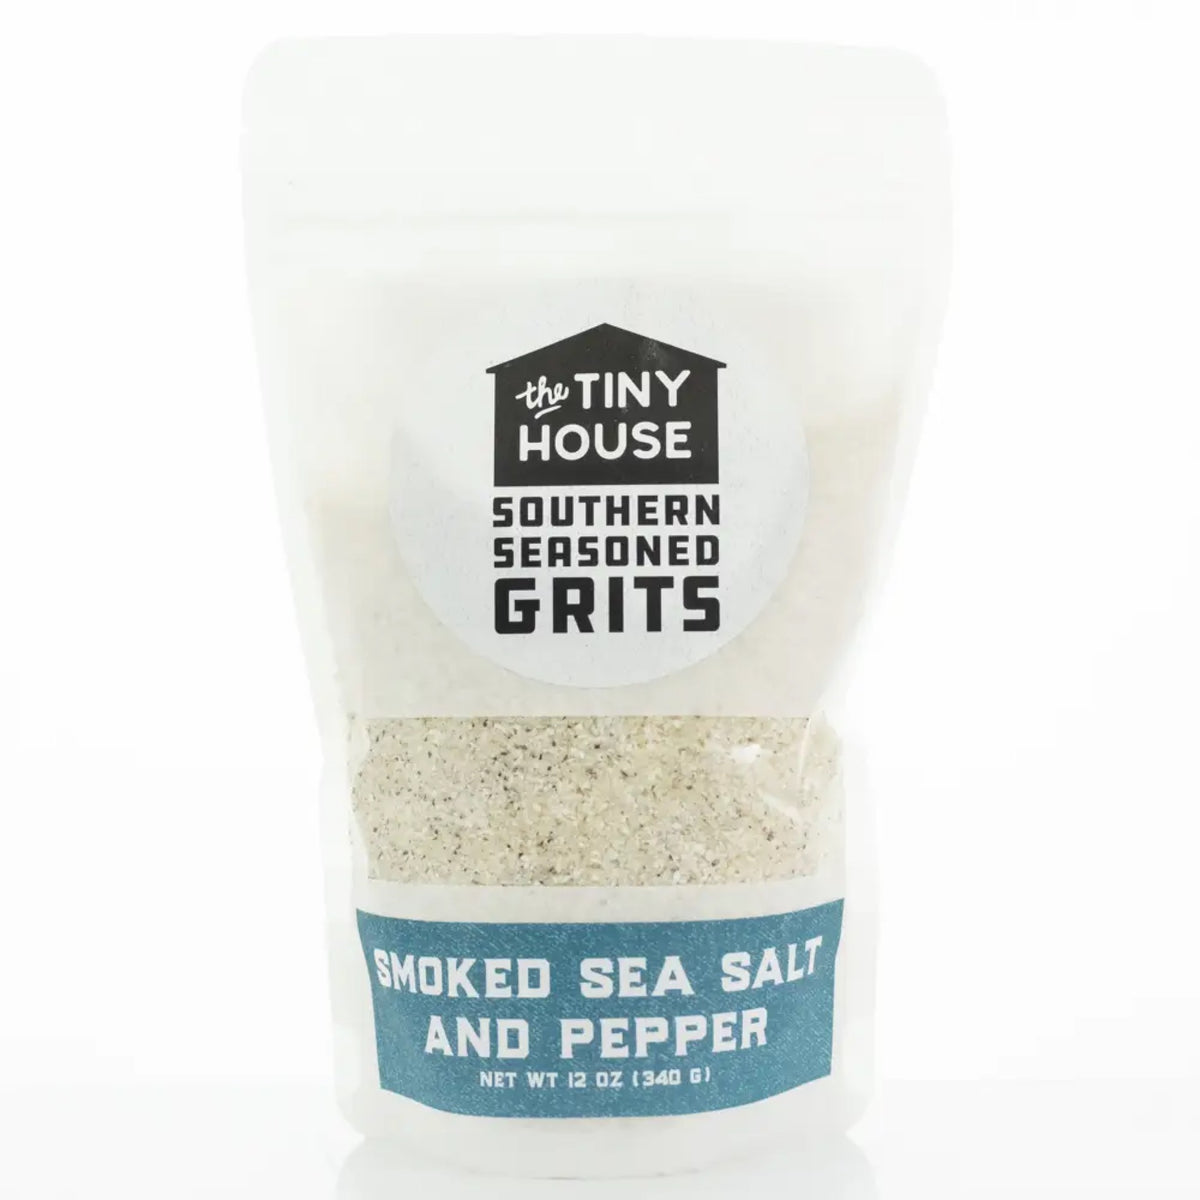 Smoked Sea Salt and Pepper Grits